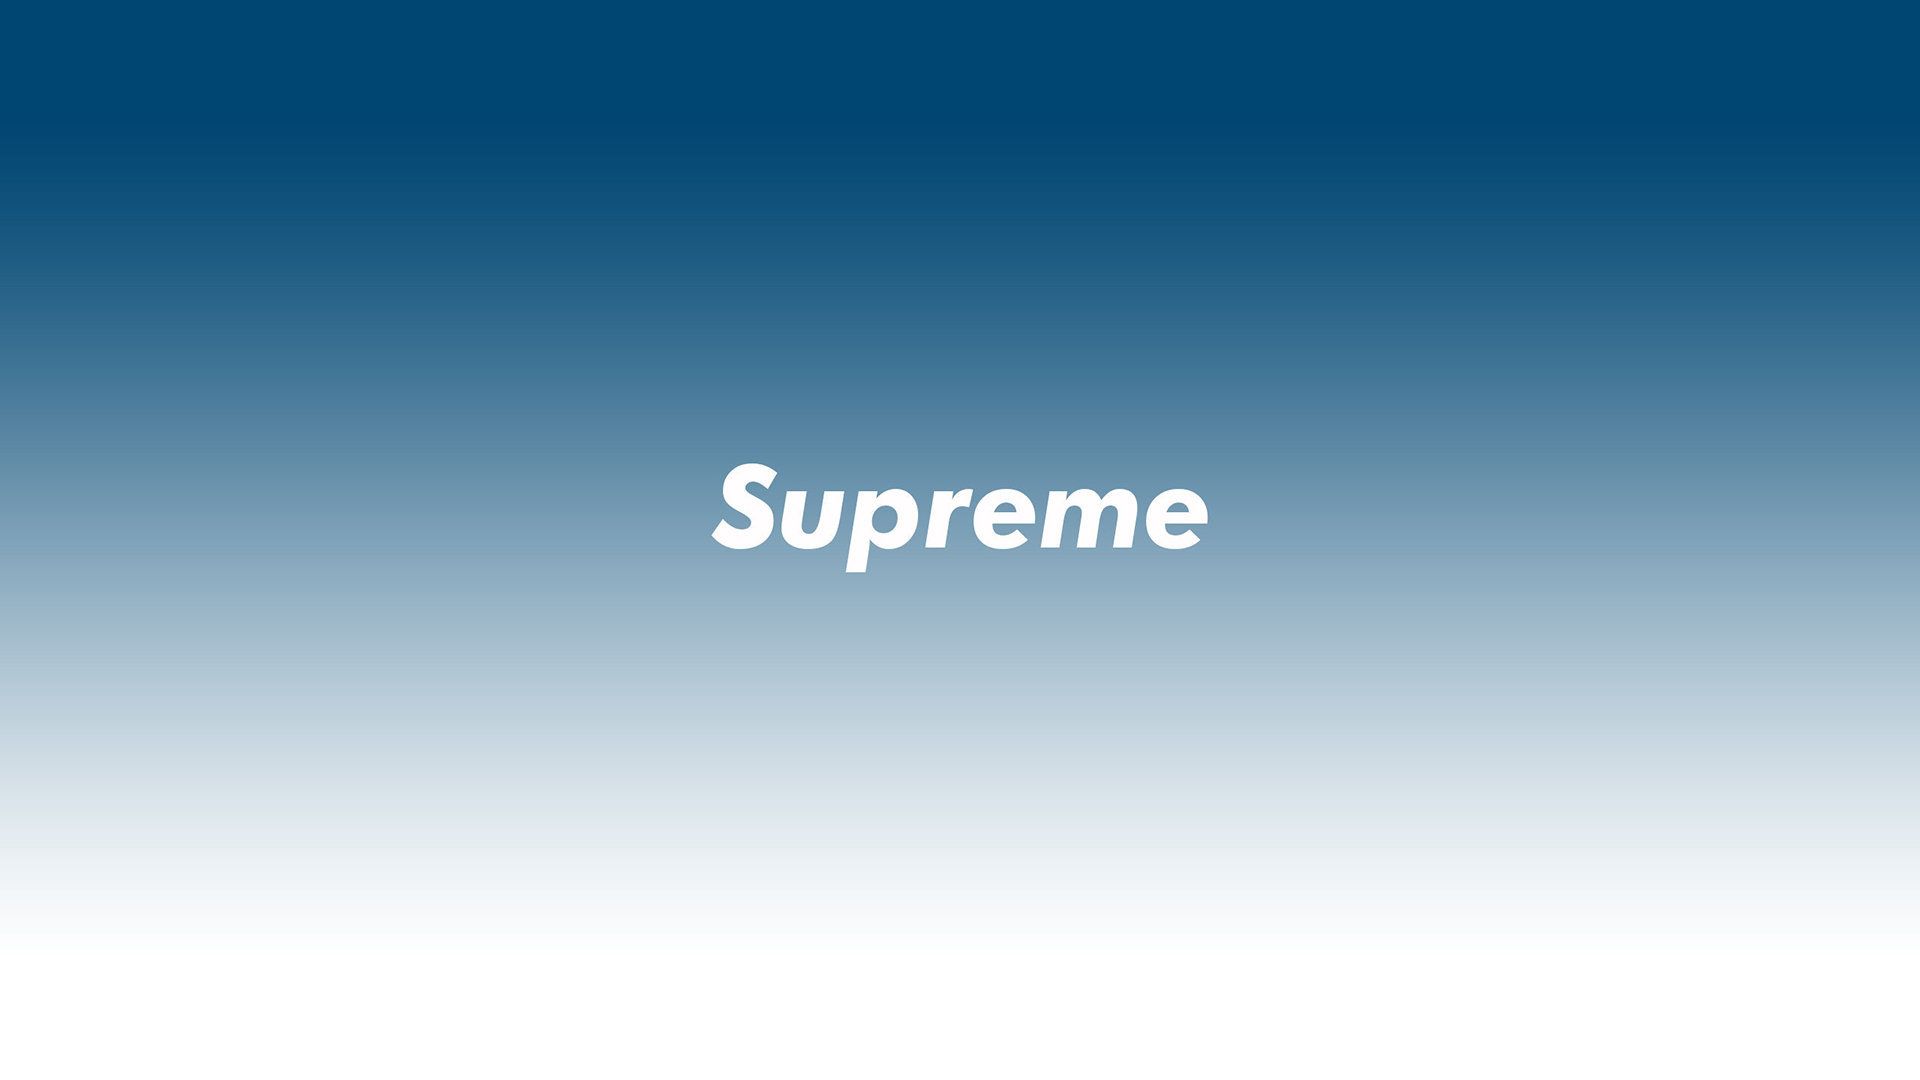 Download Supreme wallpapers for mobile phone free Supreme HD pictures